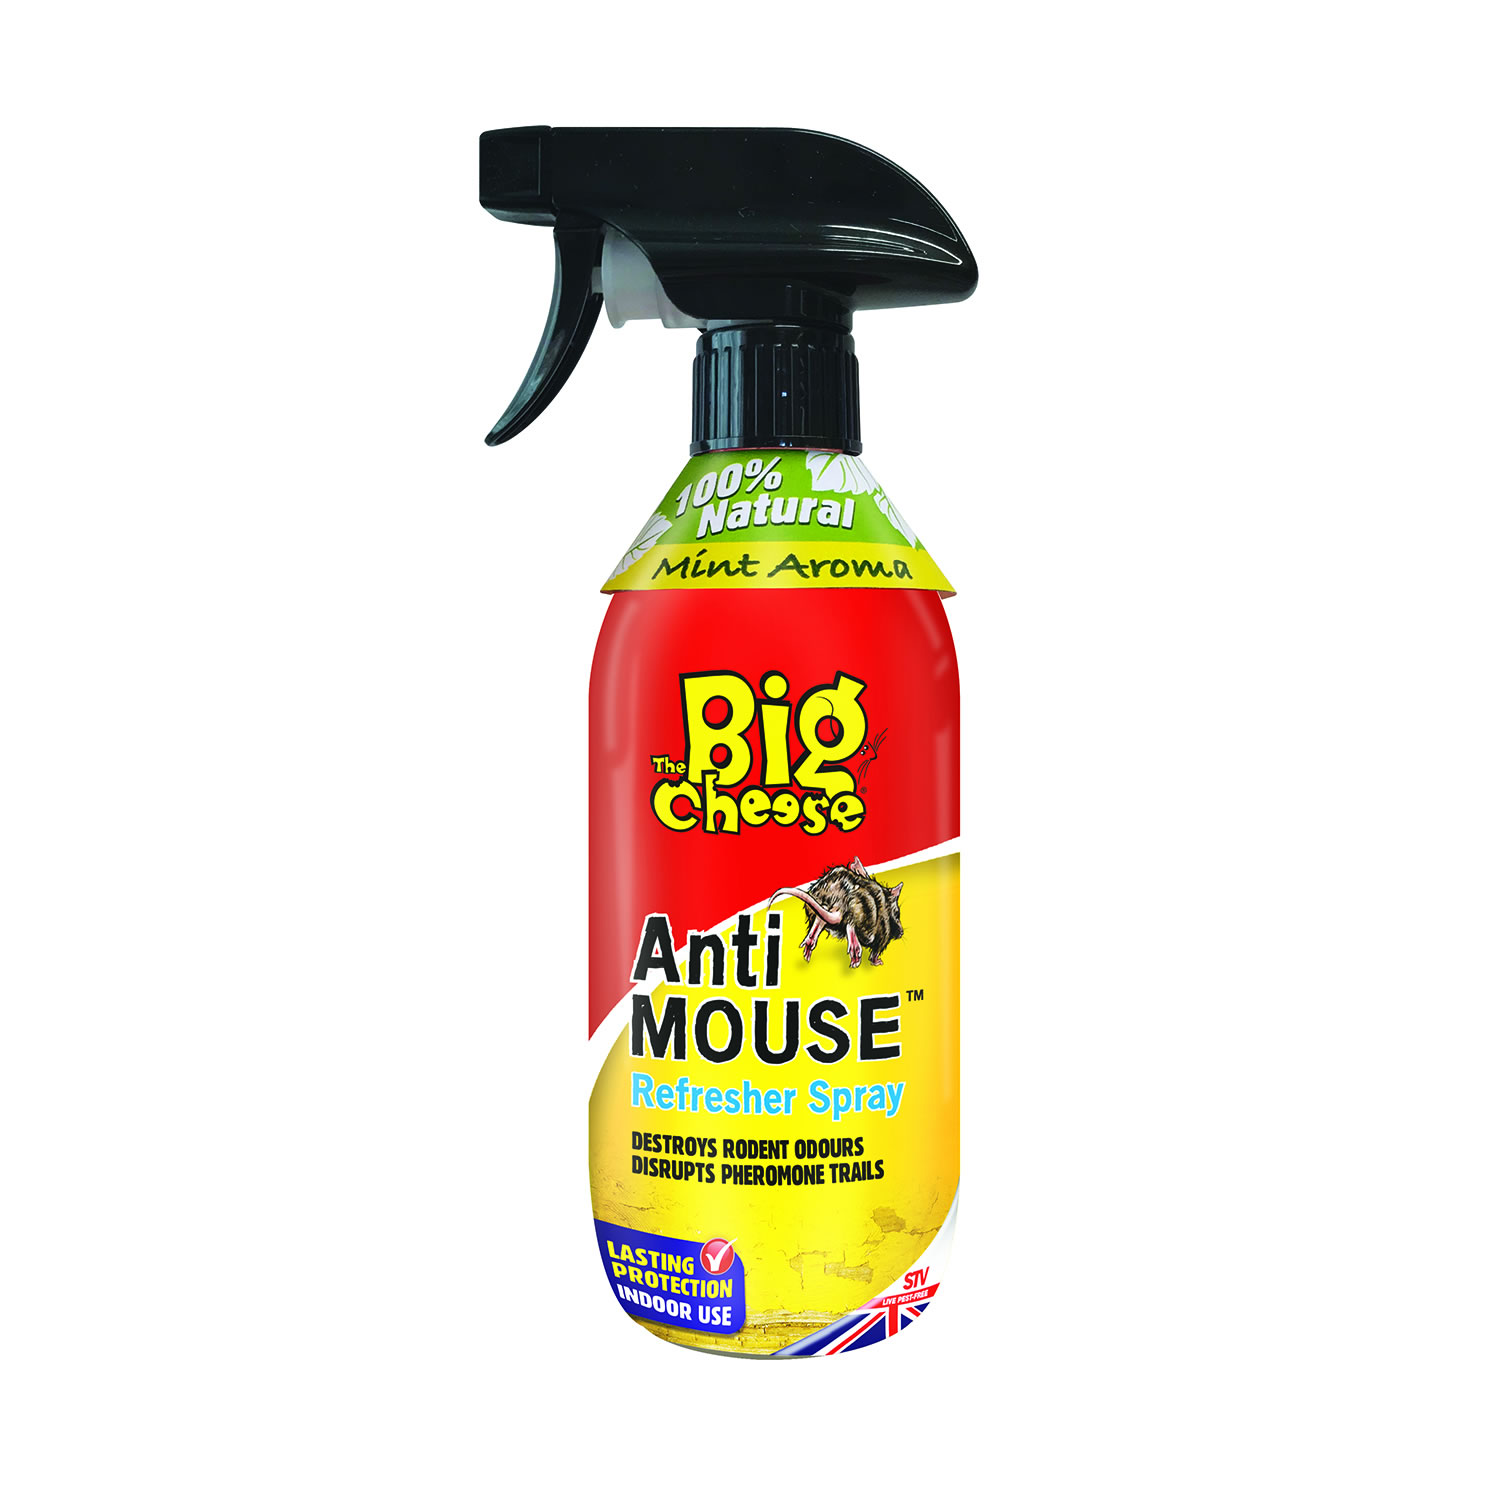 THE BIG CHEESE ANTI MOUSE REFRESHER SPRAY 500 ML